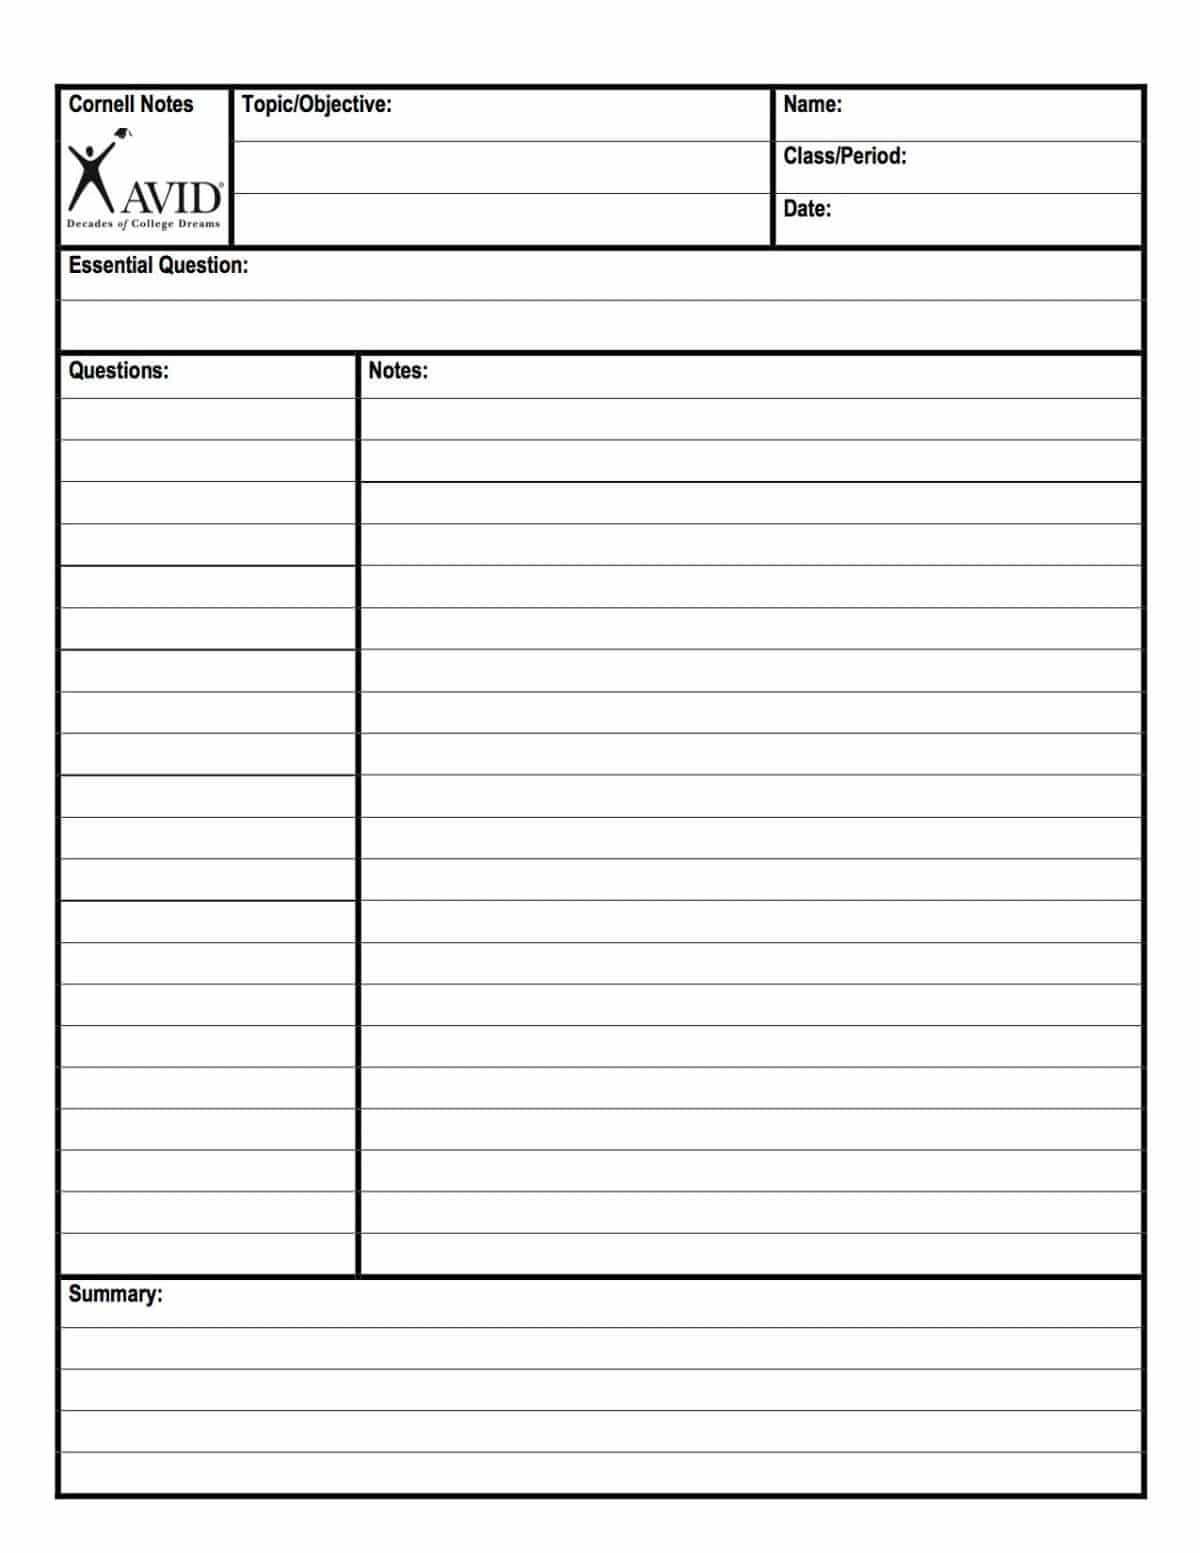 Cornell note template for mac